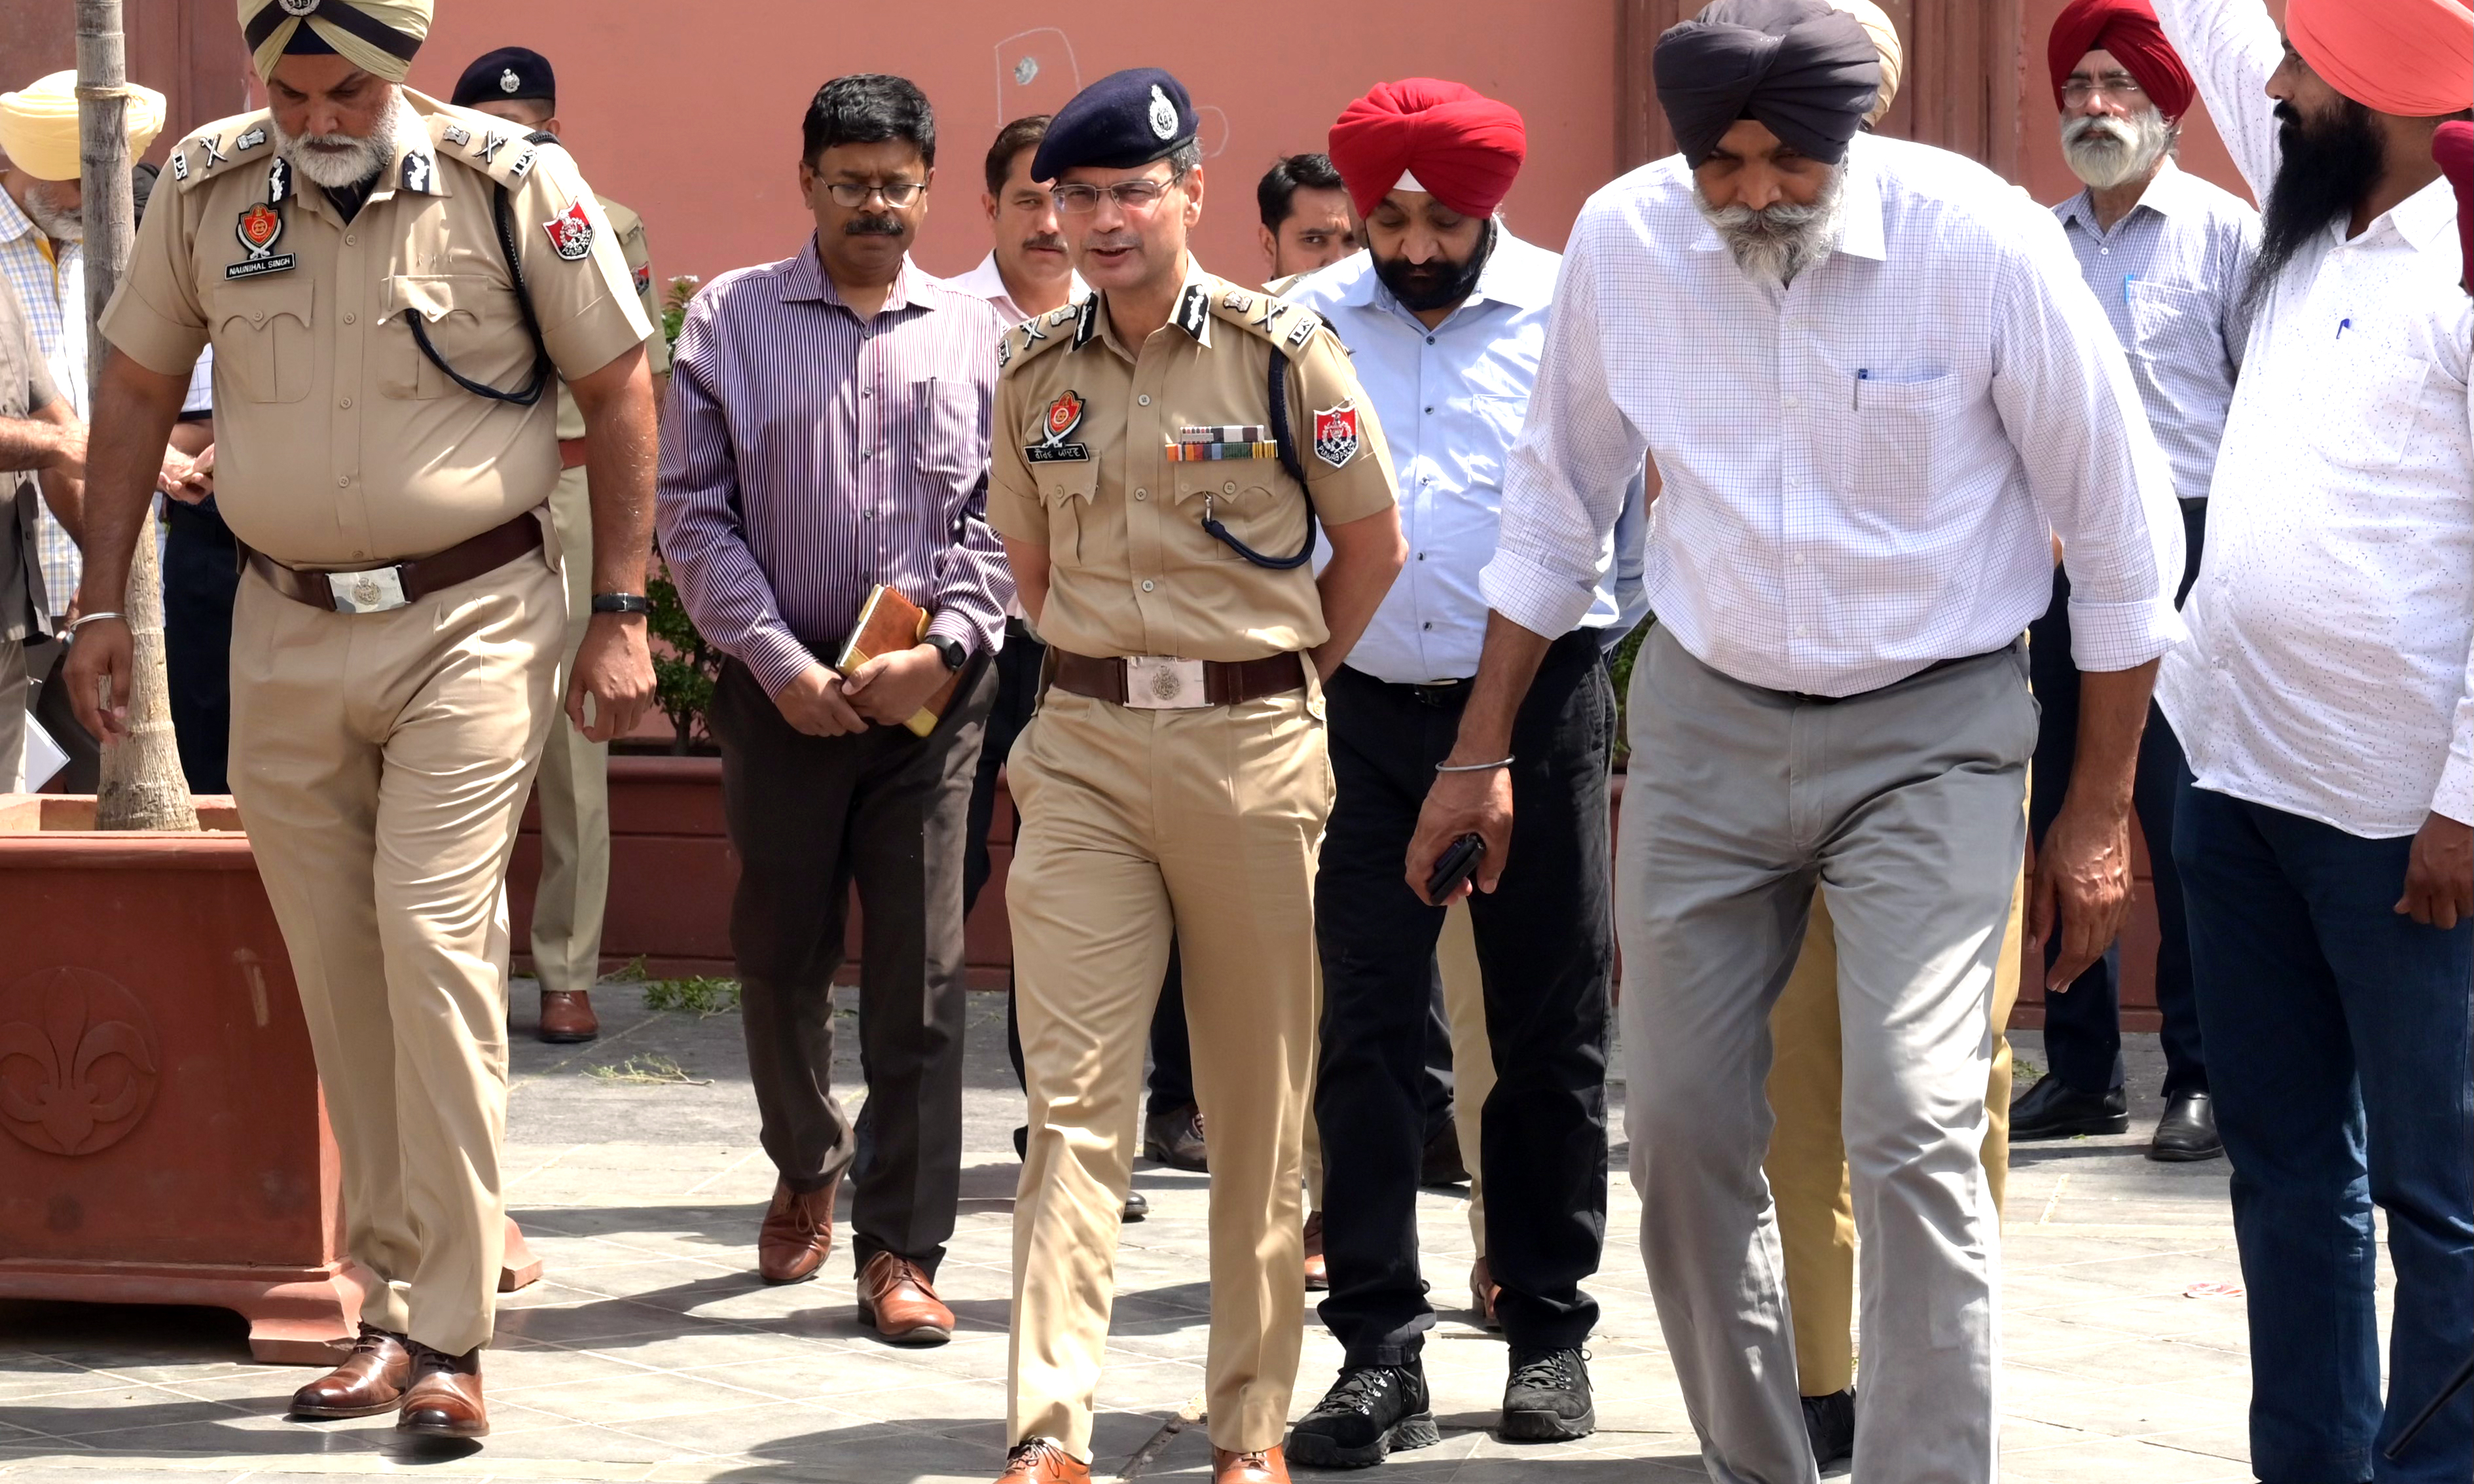 AMRITSAR: Punjab Police Director General (DG) Gaurav Yadav (C) inspects the site of another blast at Heritage Street in Amritsar. – AFP